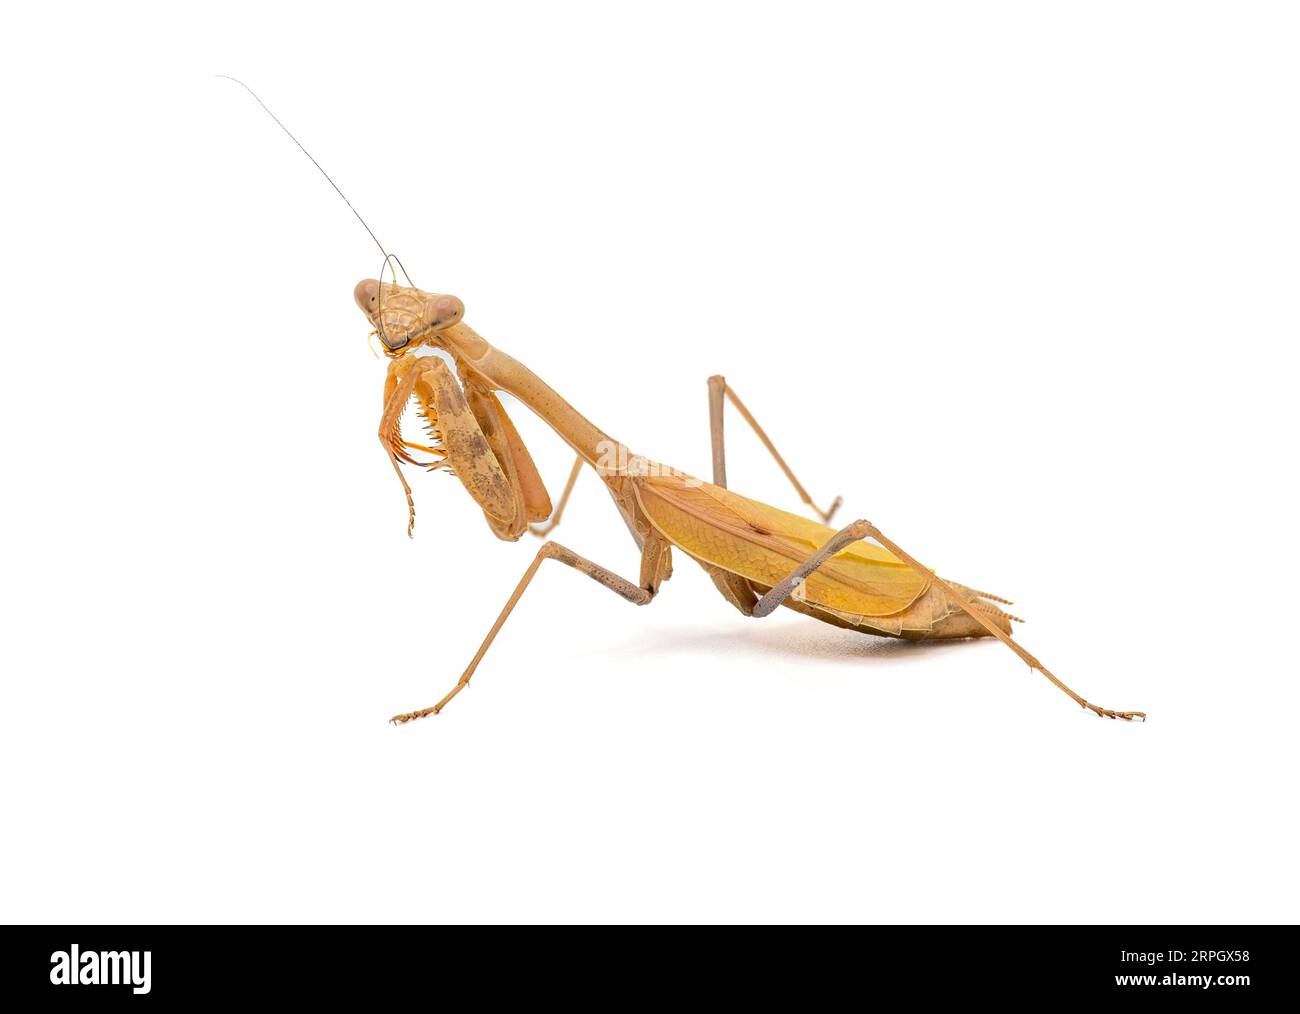 This beautiful Praying Mantis was isolated against a white background, photographed, and then releasbed back into the garden it was benefitting. Stock Photo